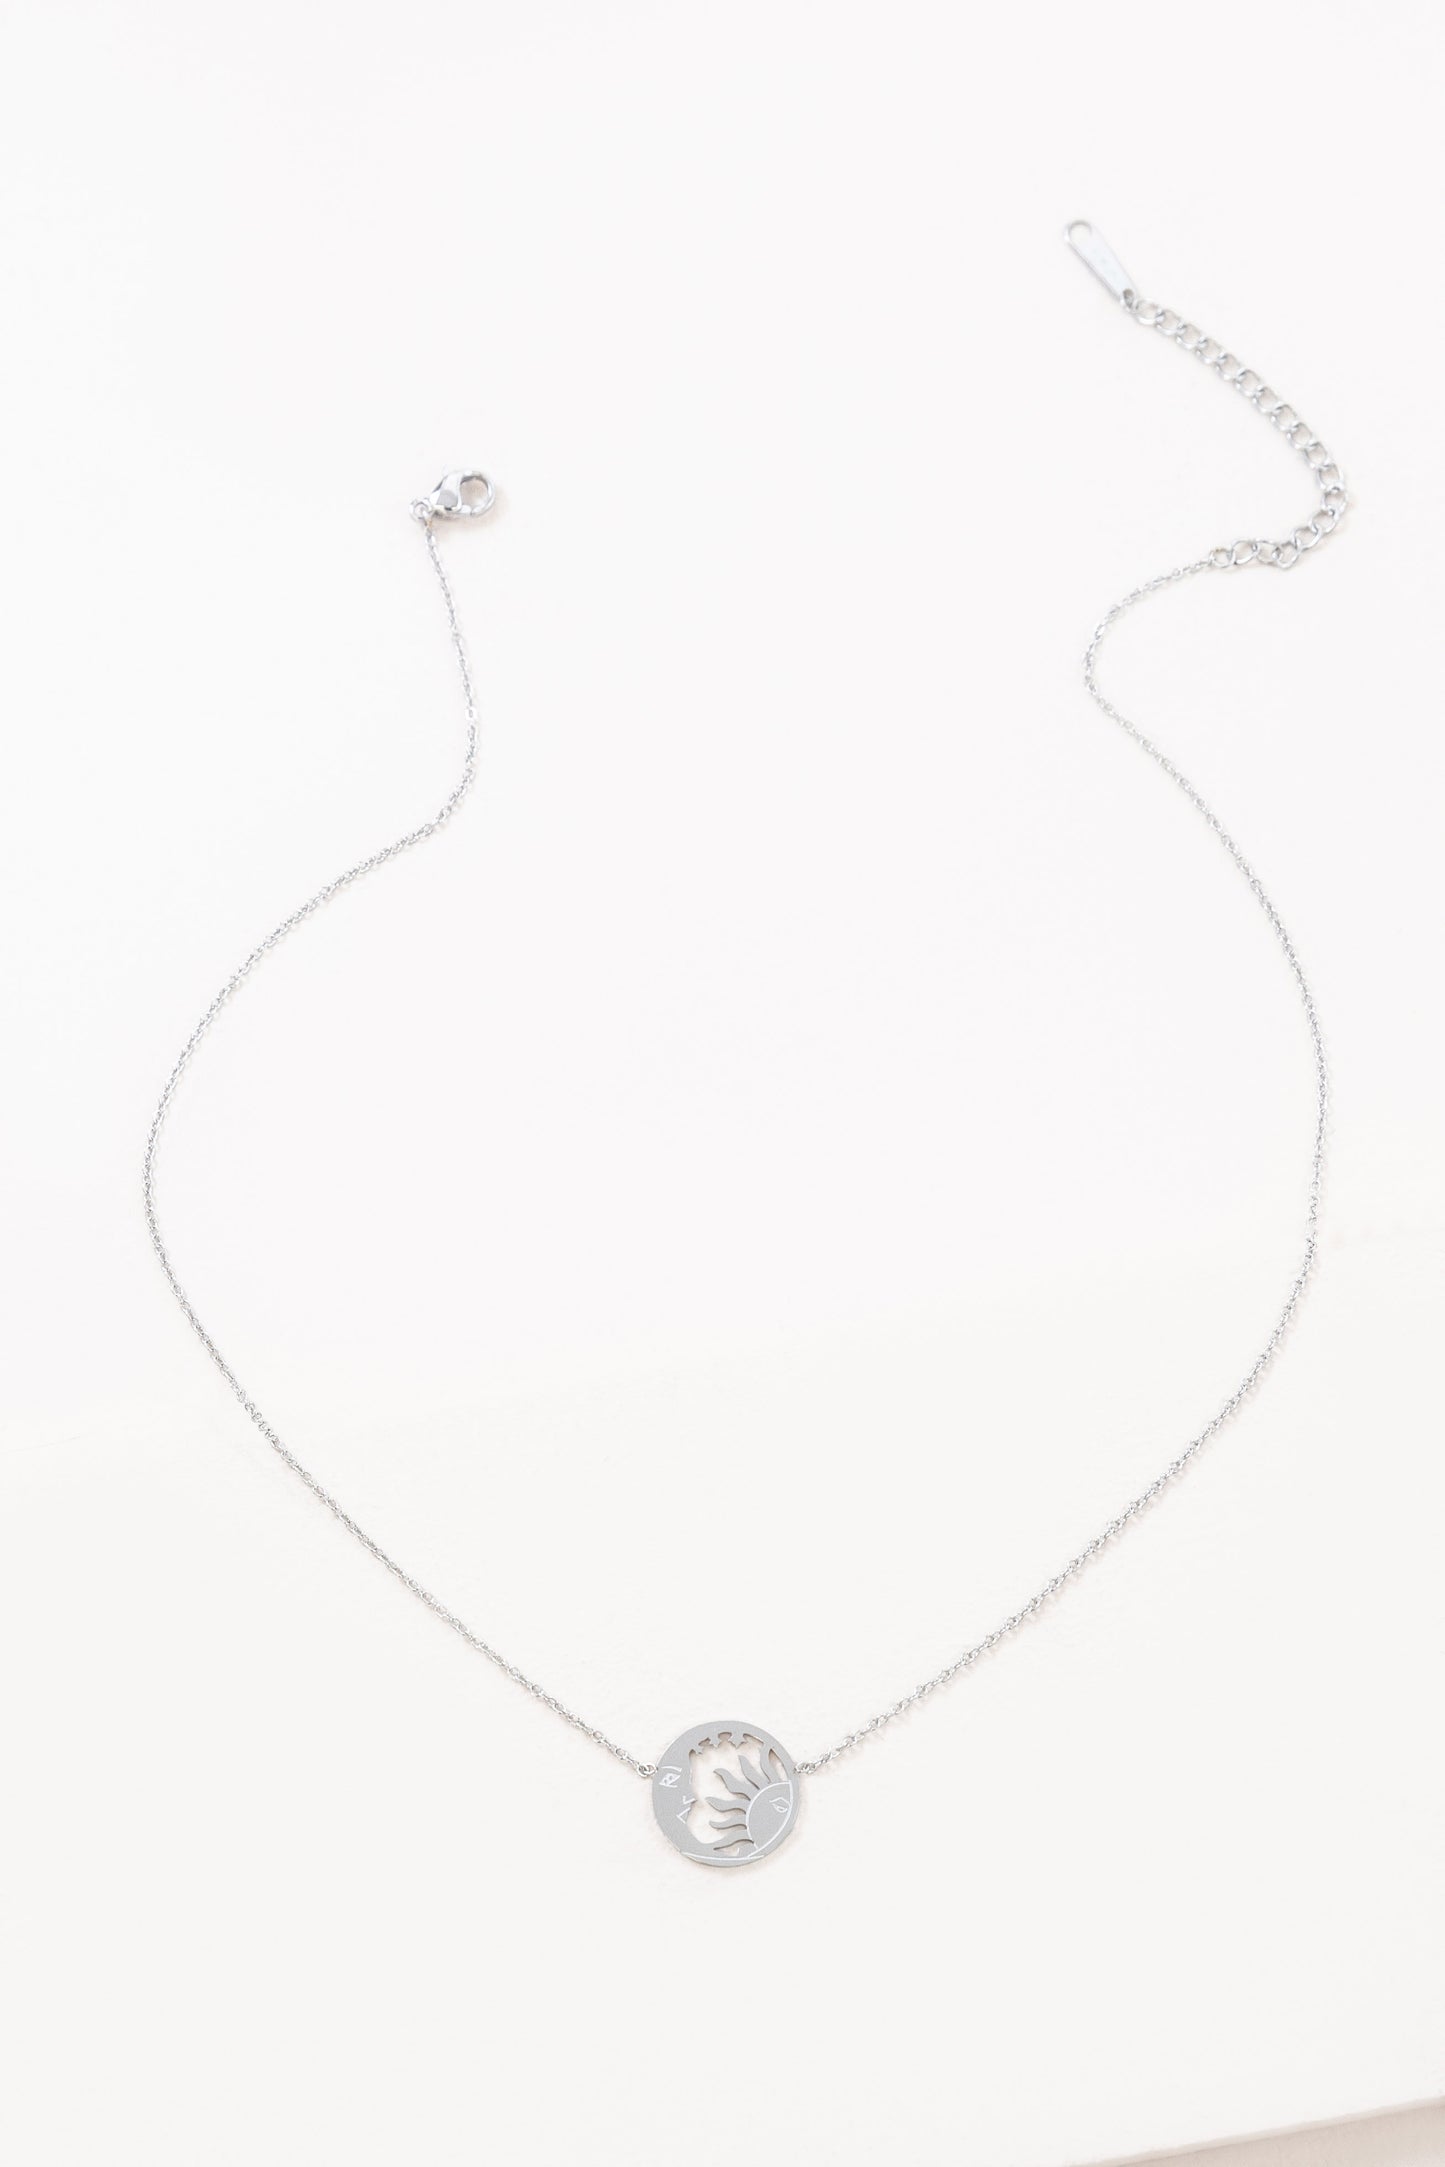 Match Made In Heaven Necklace | Silver